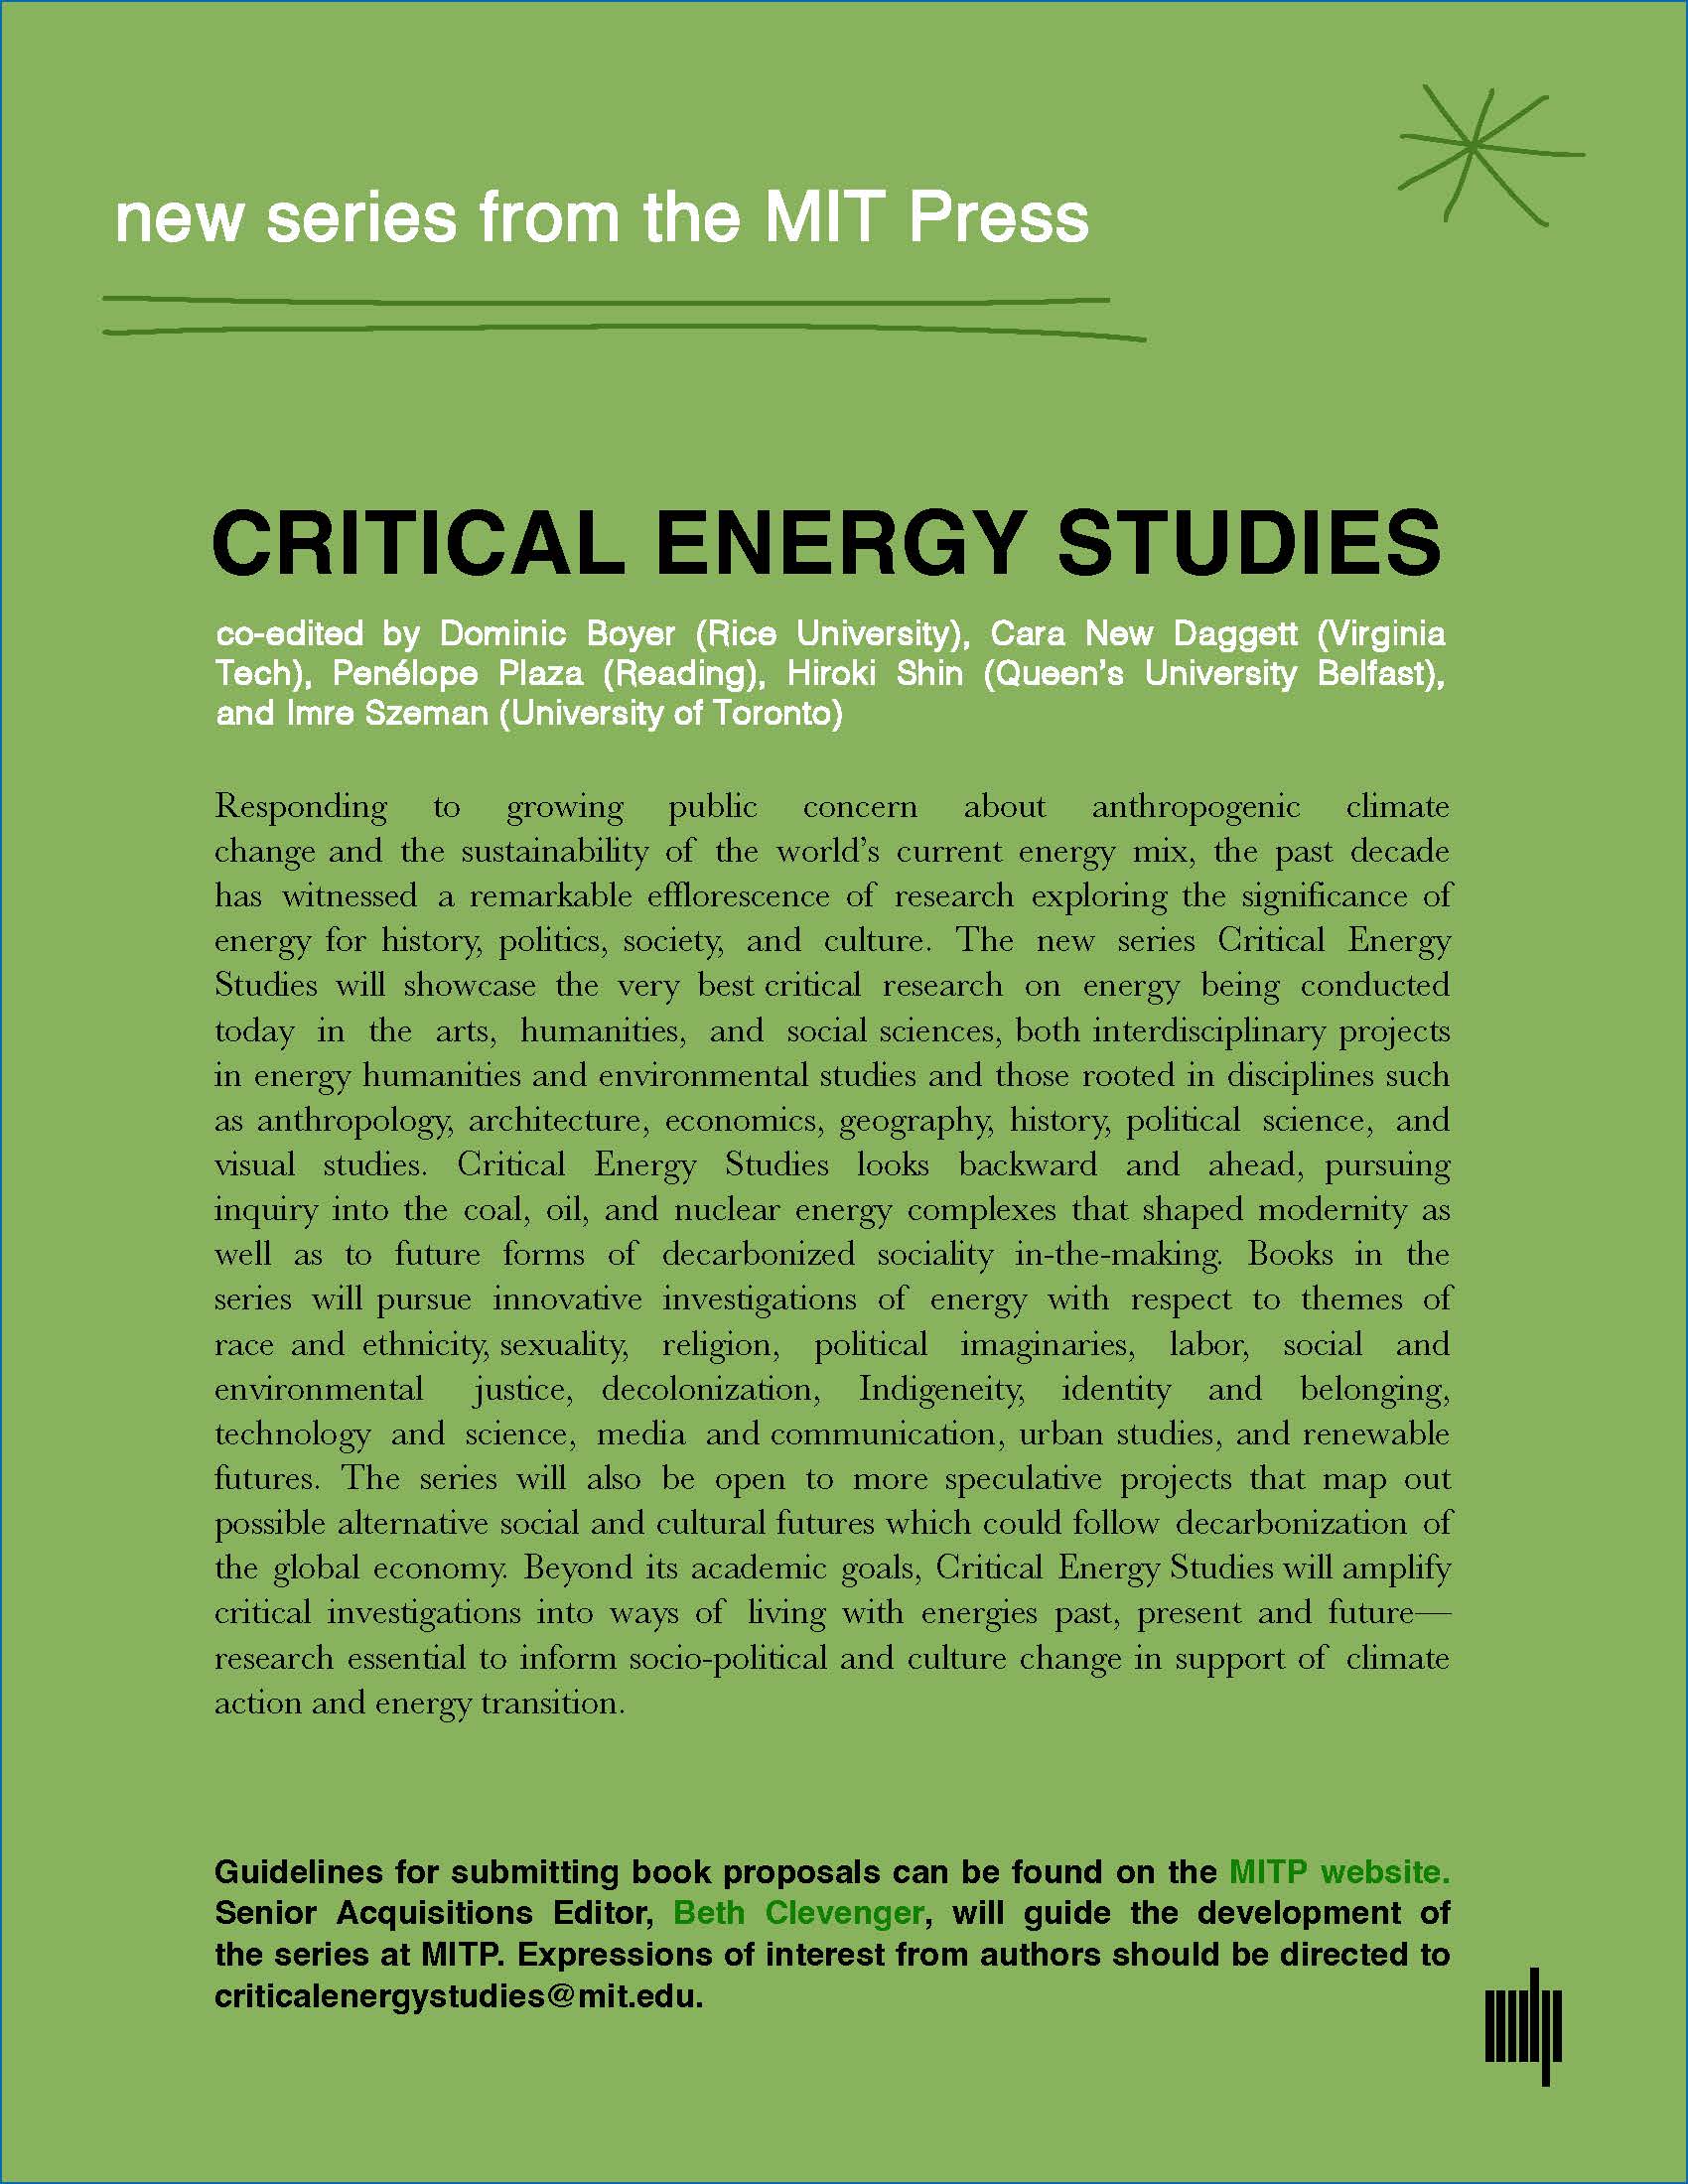 Critical Energy Studies. A New Book Series with The MIT Press.